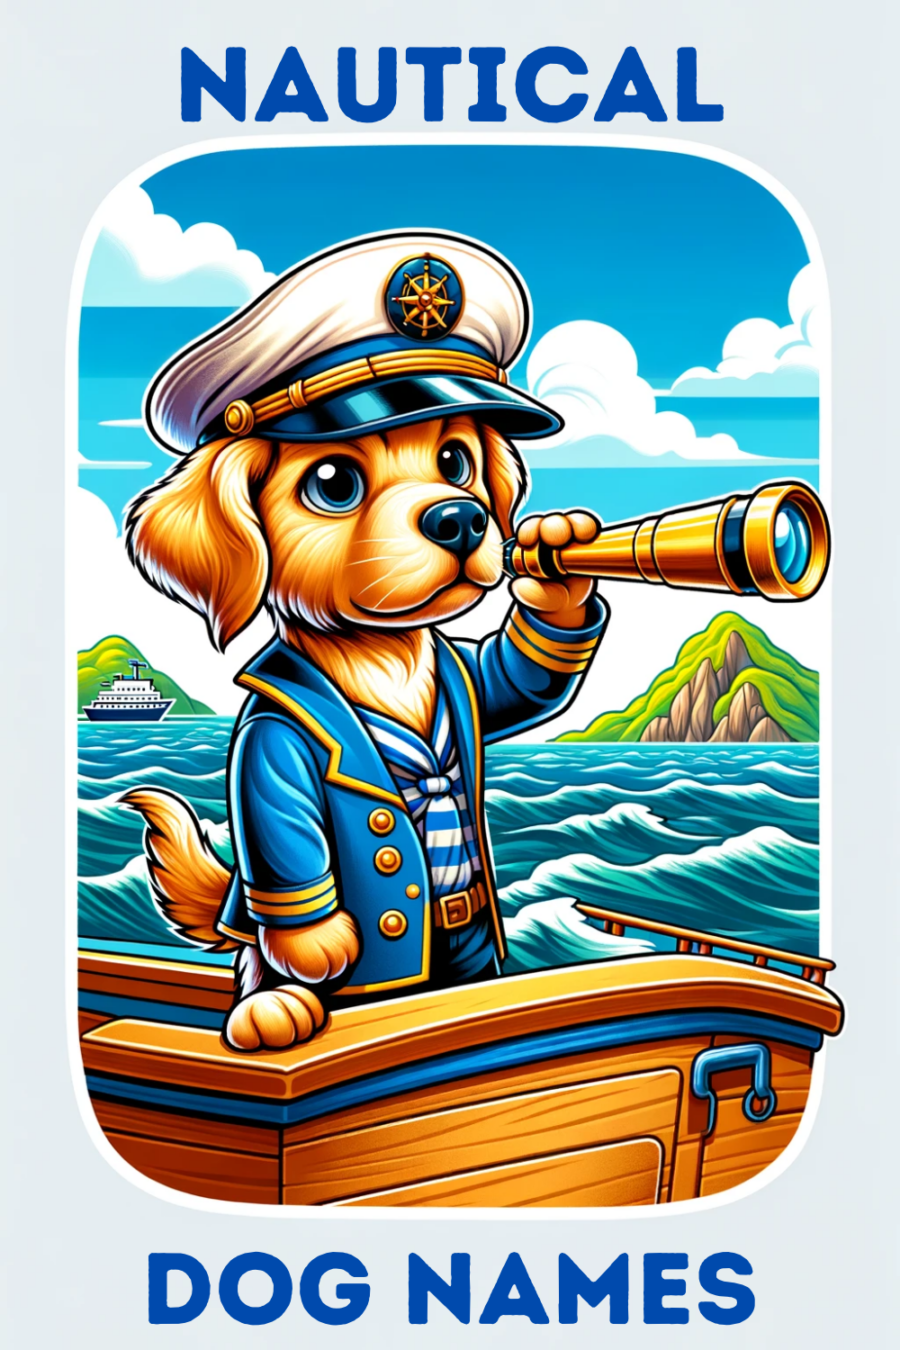 cartoon of golden retriever wearing nautical cap and holding scope while standing in a boat